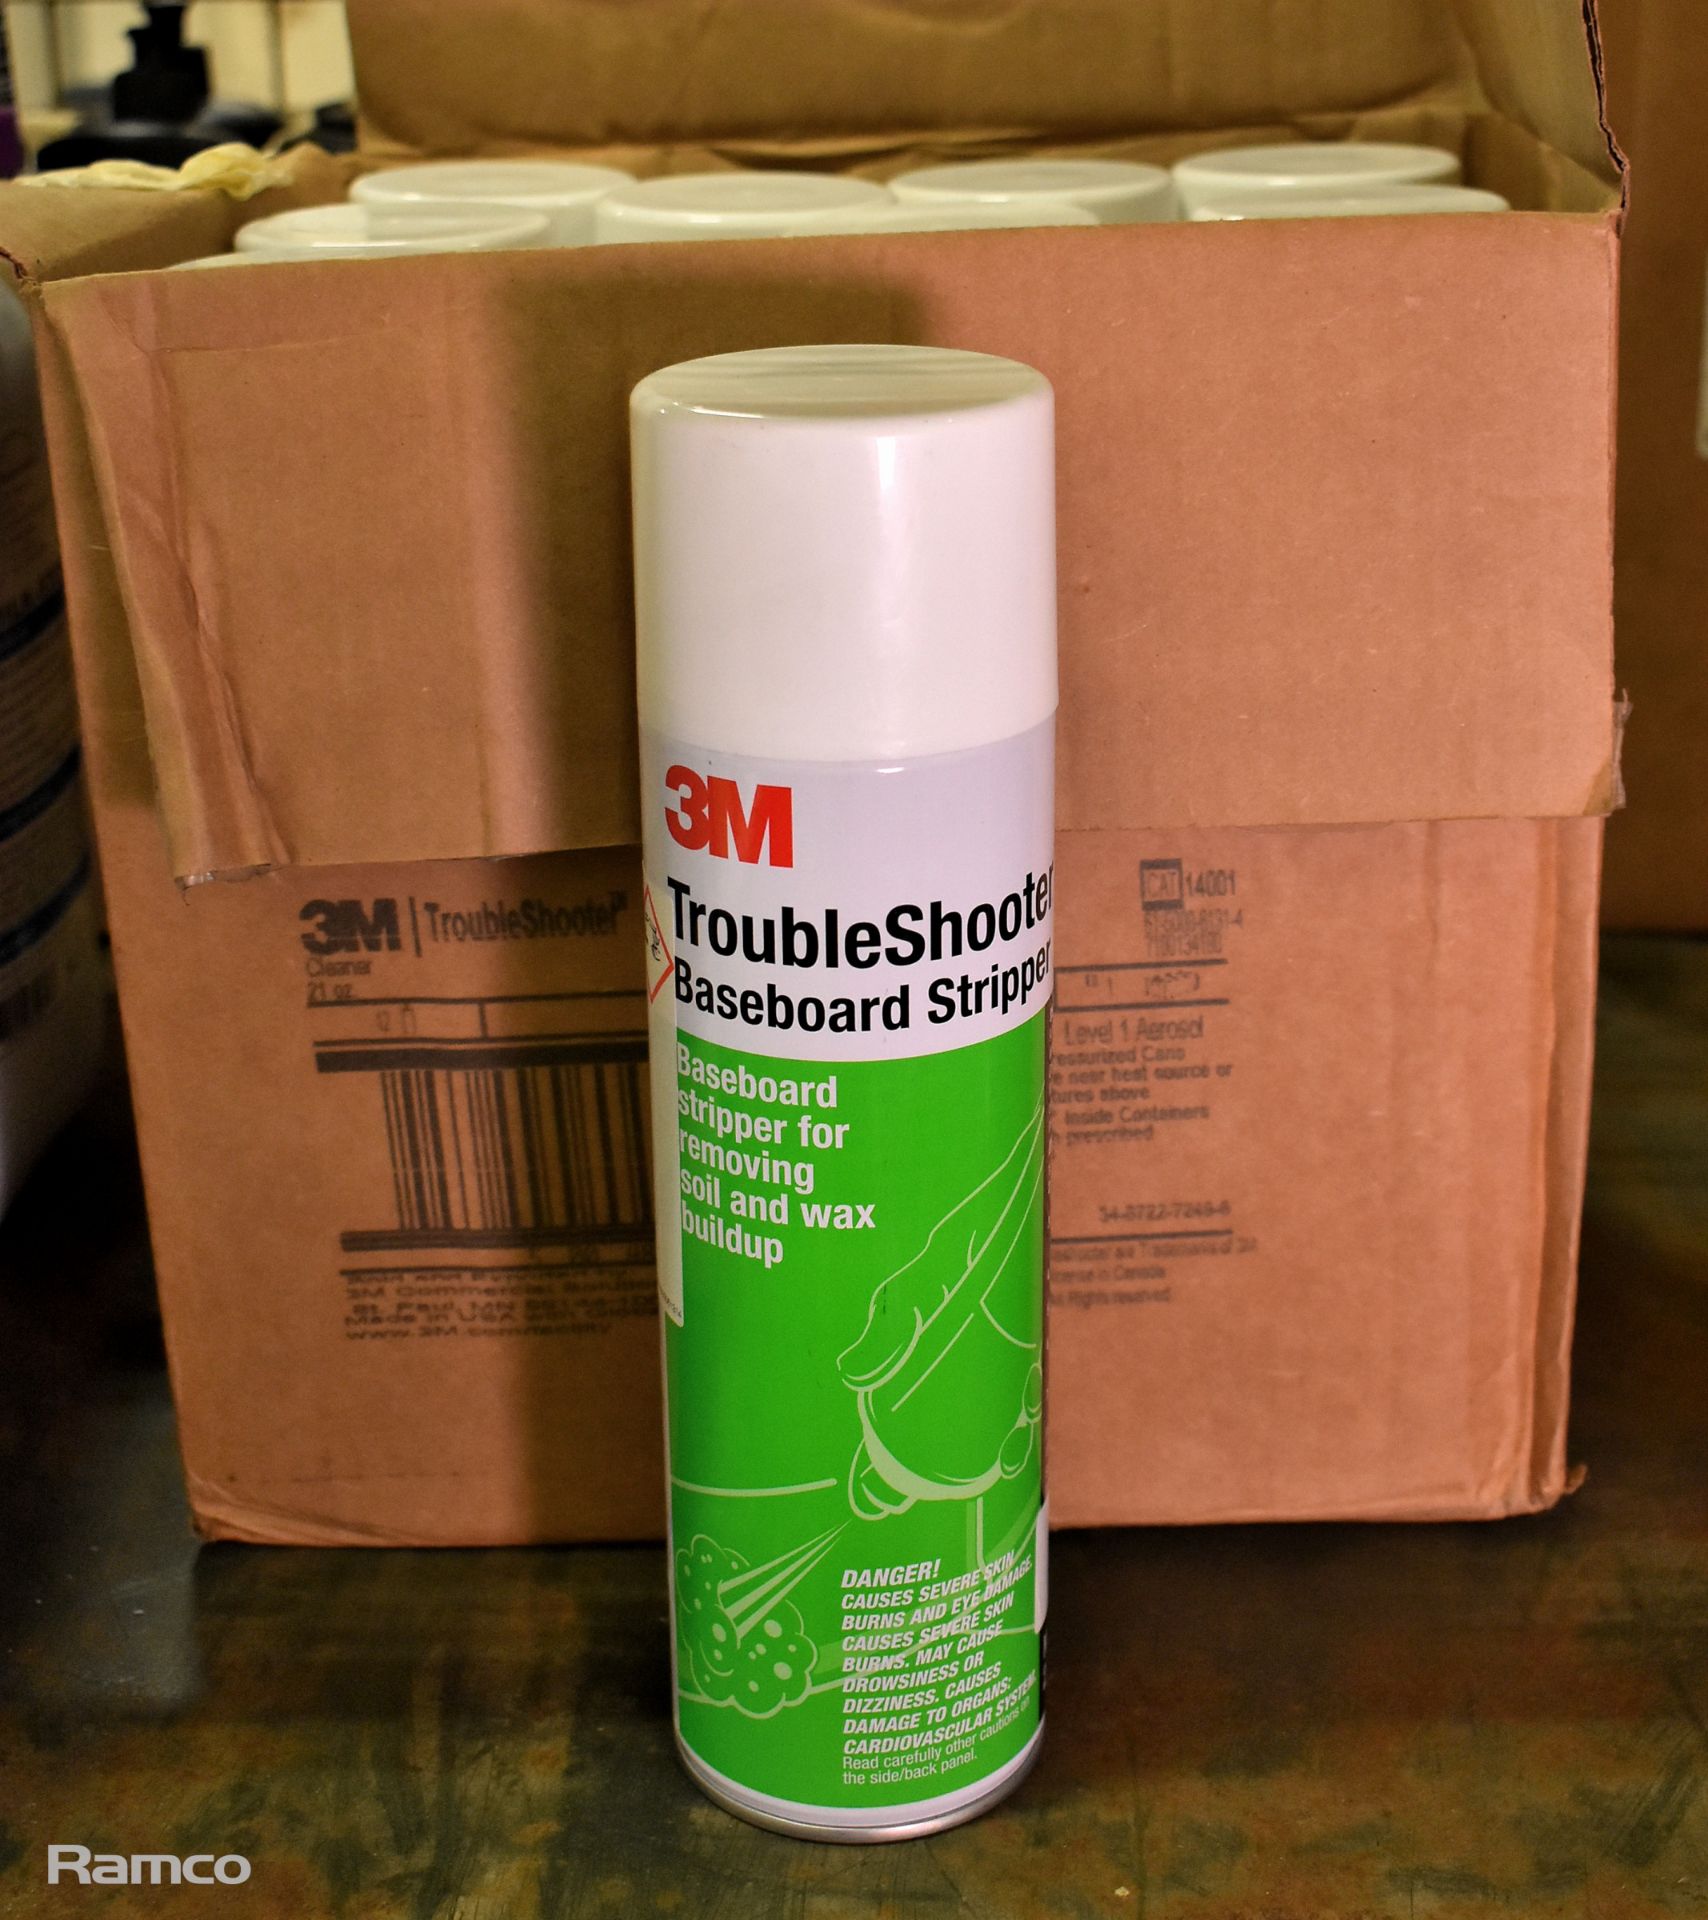 Garage consumables - Oils, lubricants, degreaser wipes - CANNOT BE SENT VIA PARCEL - Image 10 of 15